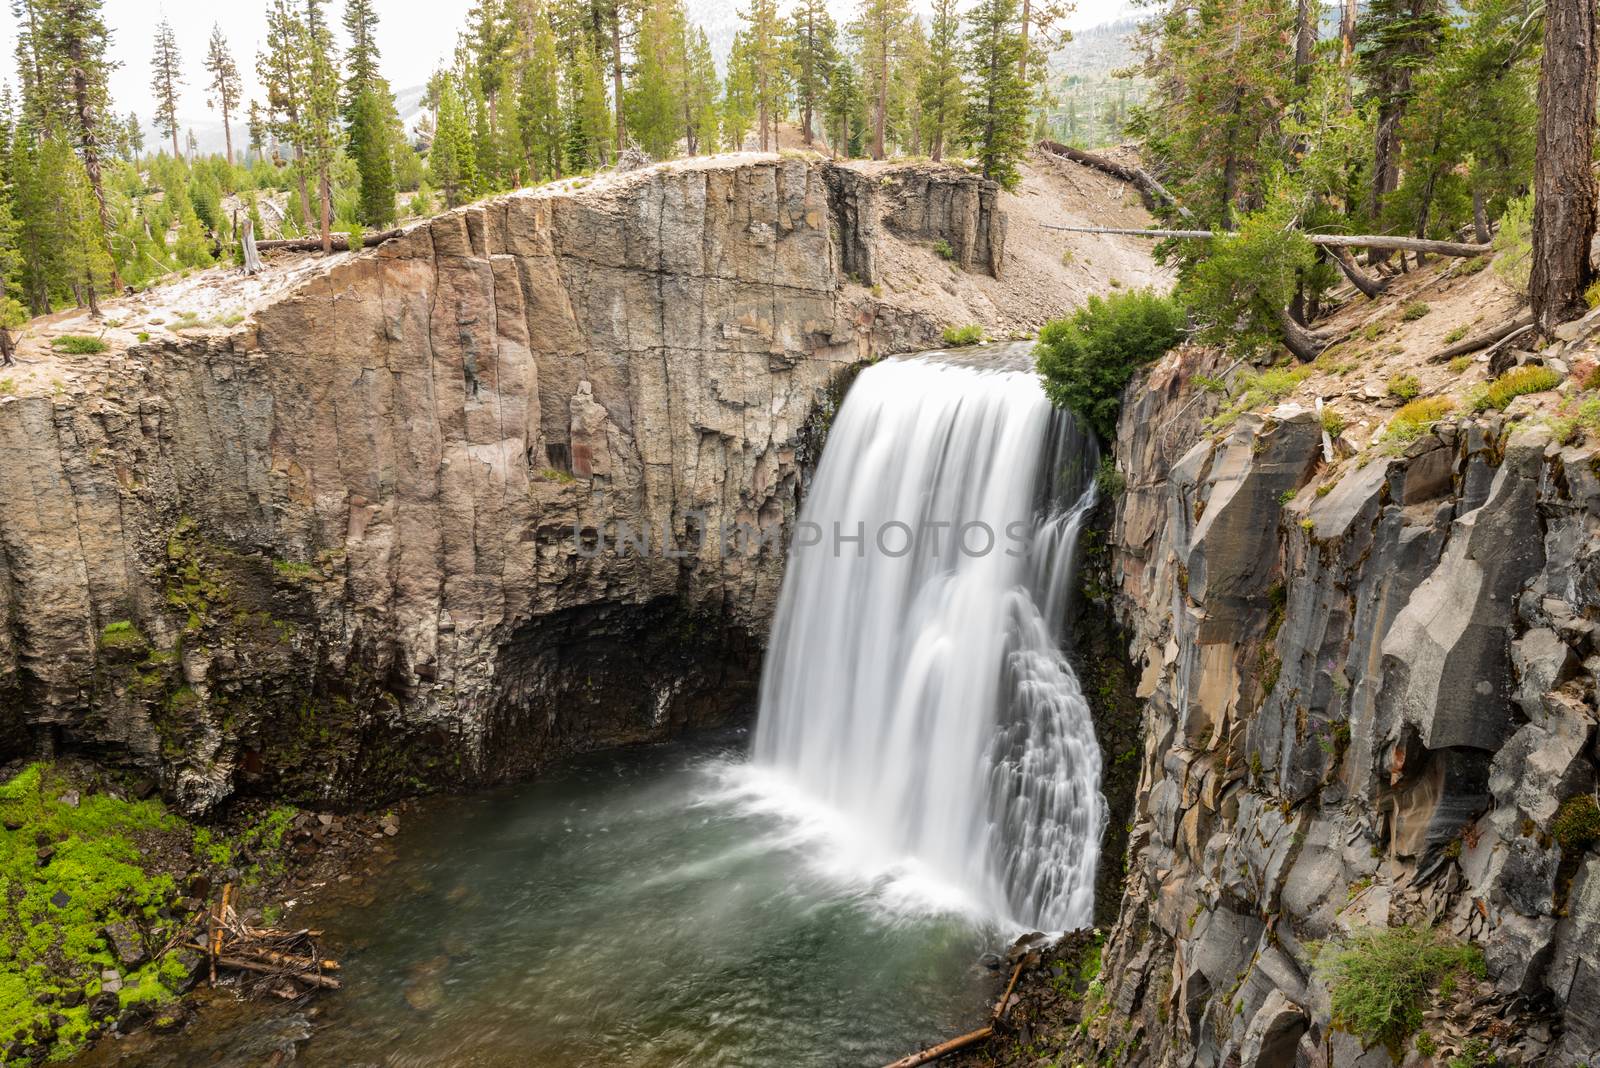 Rainbow Falls in Devils Postpile National Monument, Ansel Adams Wilderness, Inyo National Forest, California by Njean